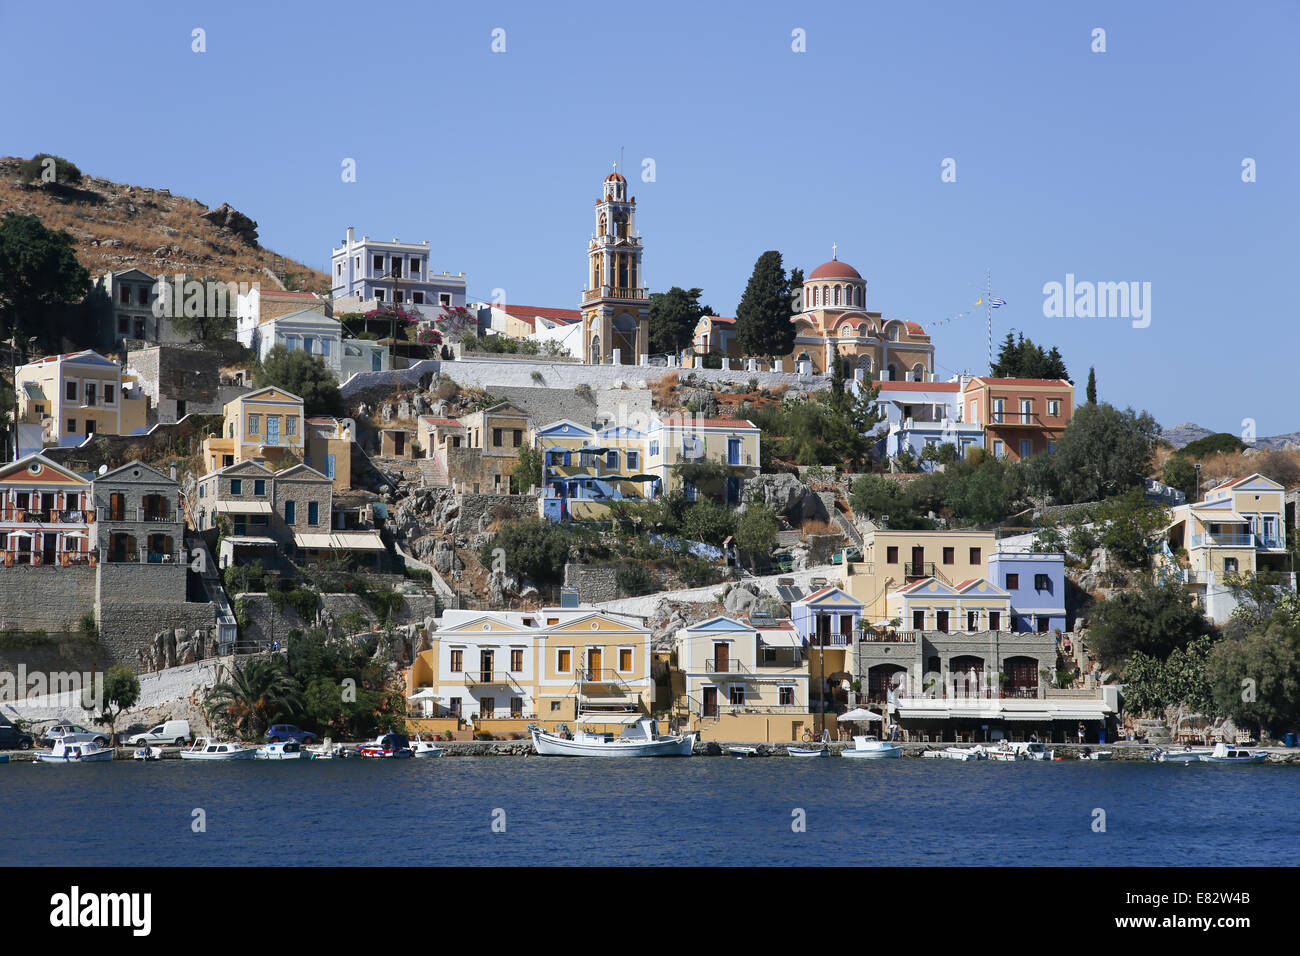 The Town of Symi on the Greek island of Symi Stock Photo